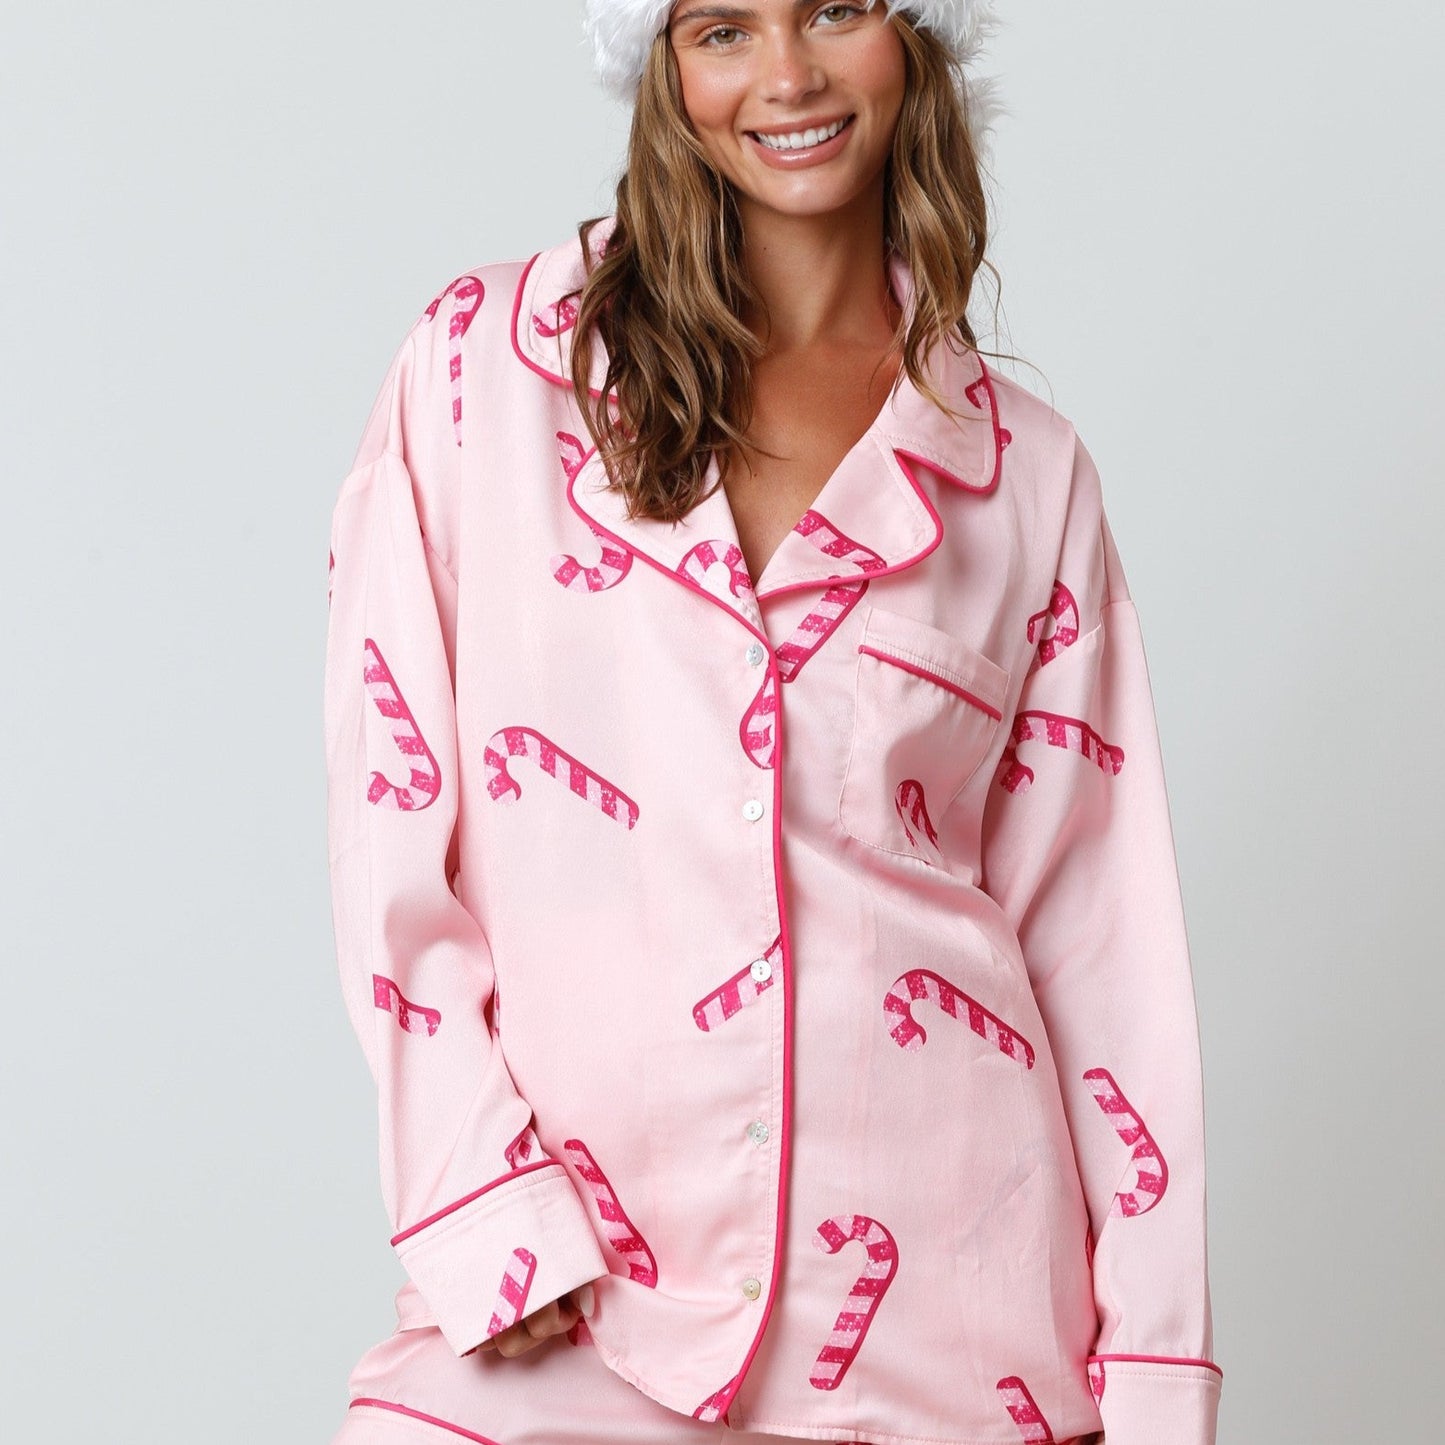 The at Shirt Wells Satin Boutique Cane Pajama Candy – Florist Pattern